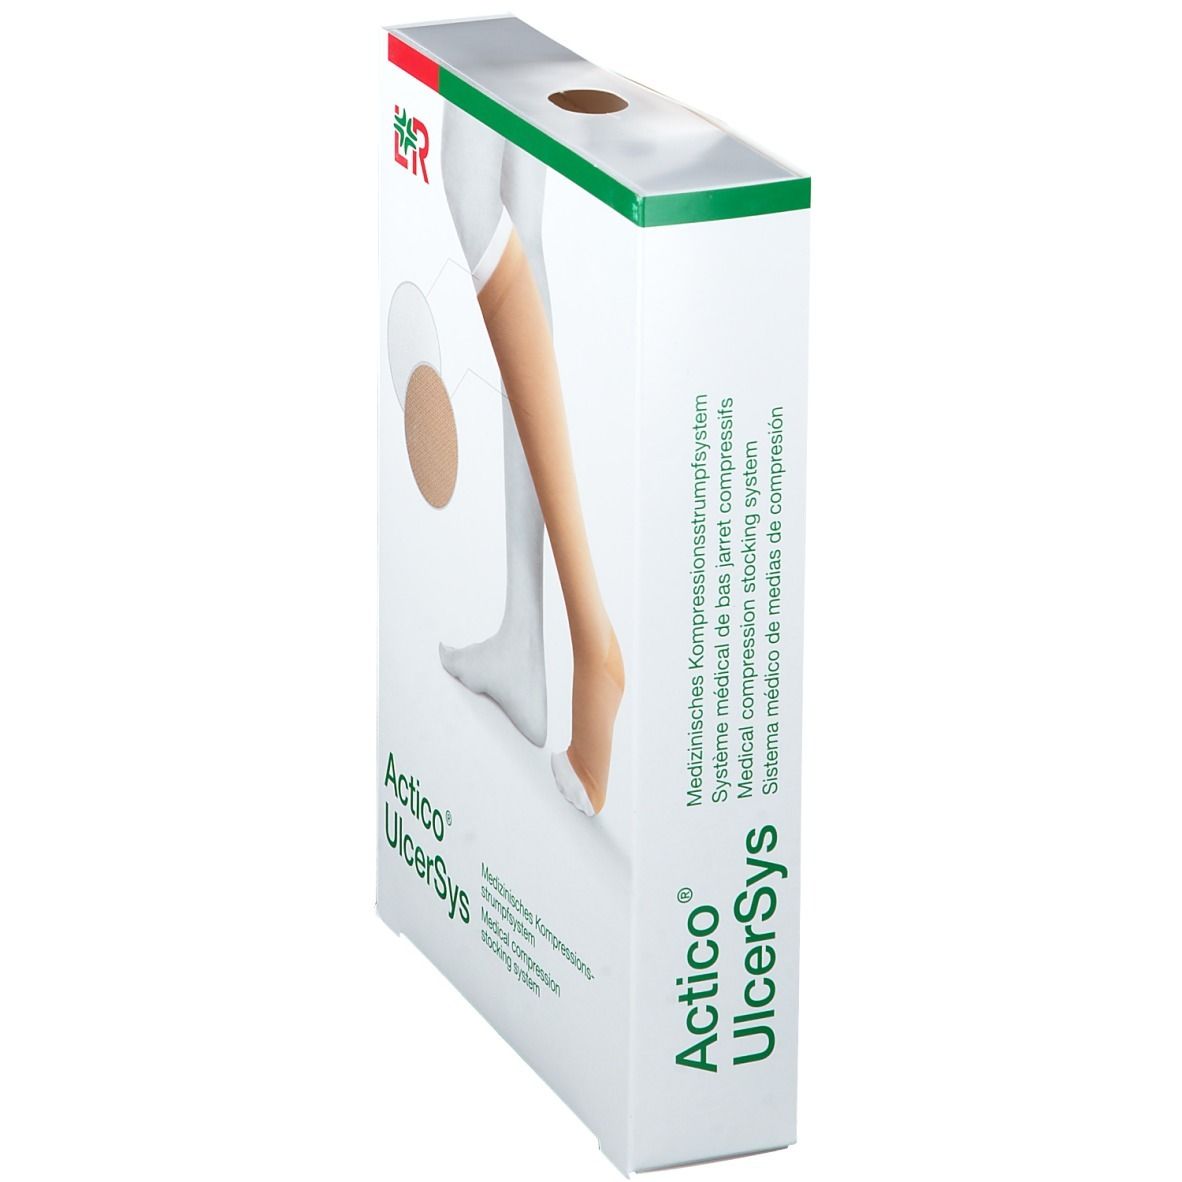 Actico® UlcerSys System Gr. XL nude-weiss - shop-apotheke.ch